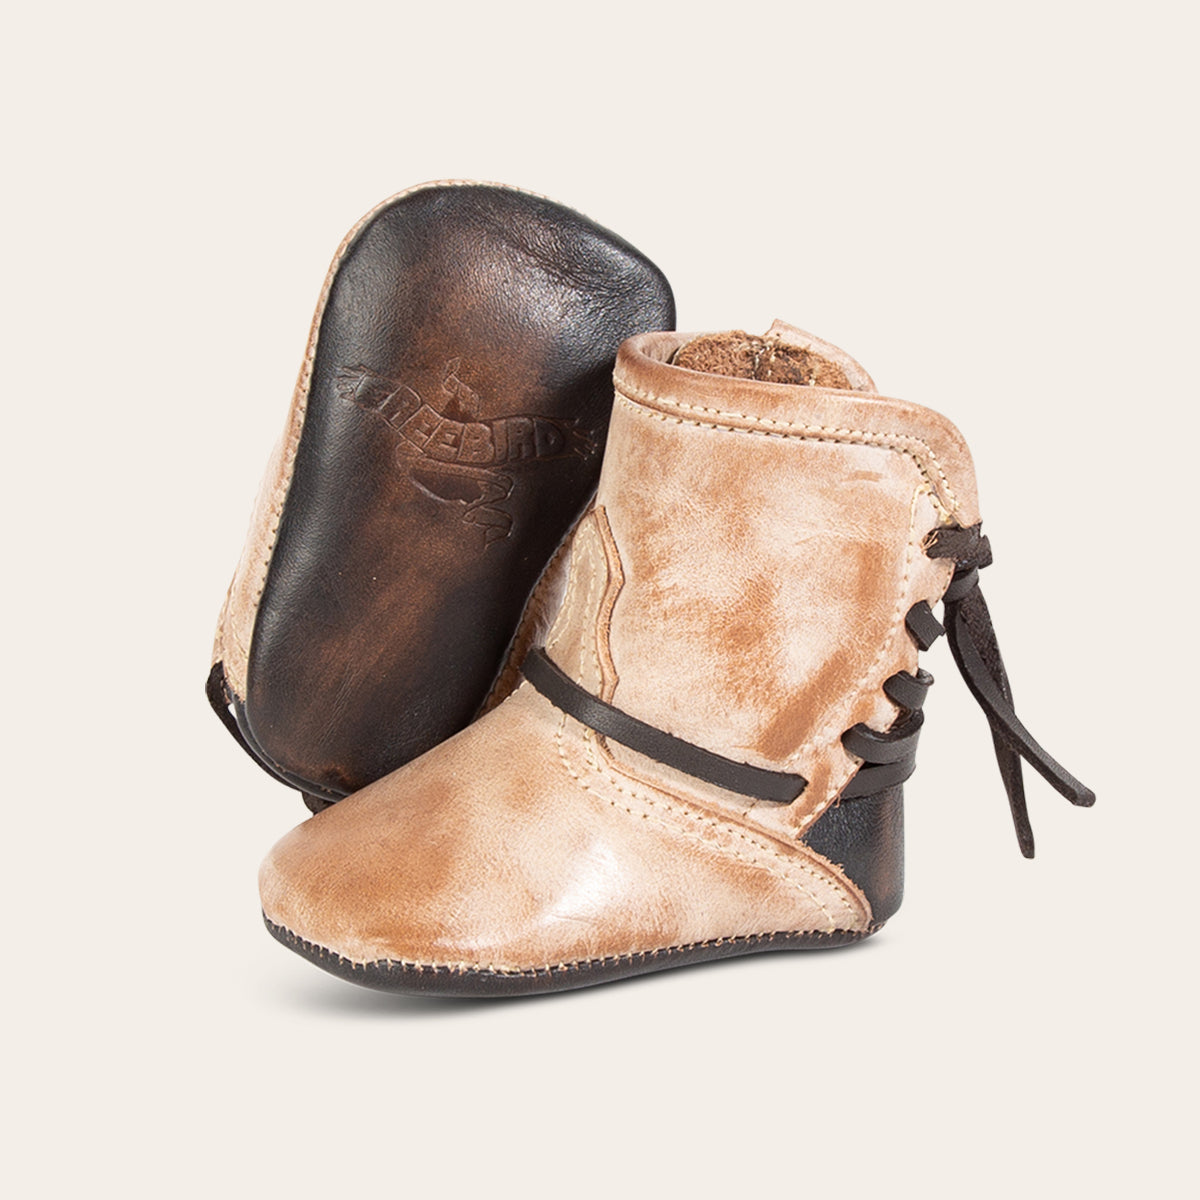 front view showing contrasting leather lace detailing and soft leather imprinted sole on FREEBIRD infant baby coal taupe leather bootie 